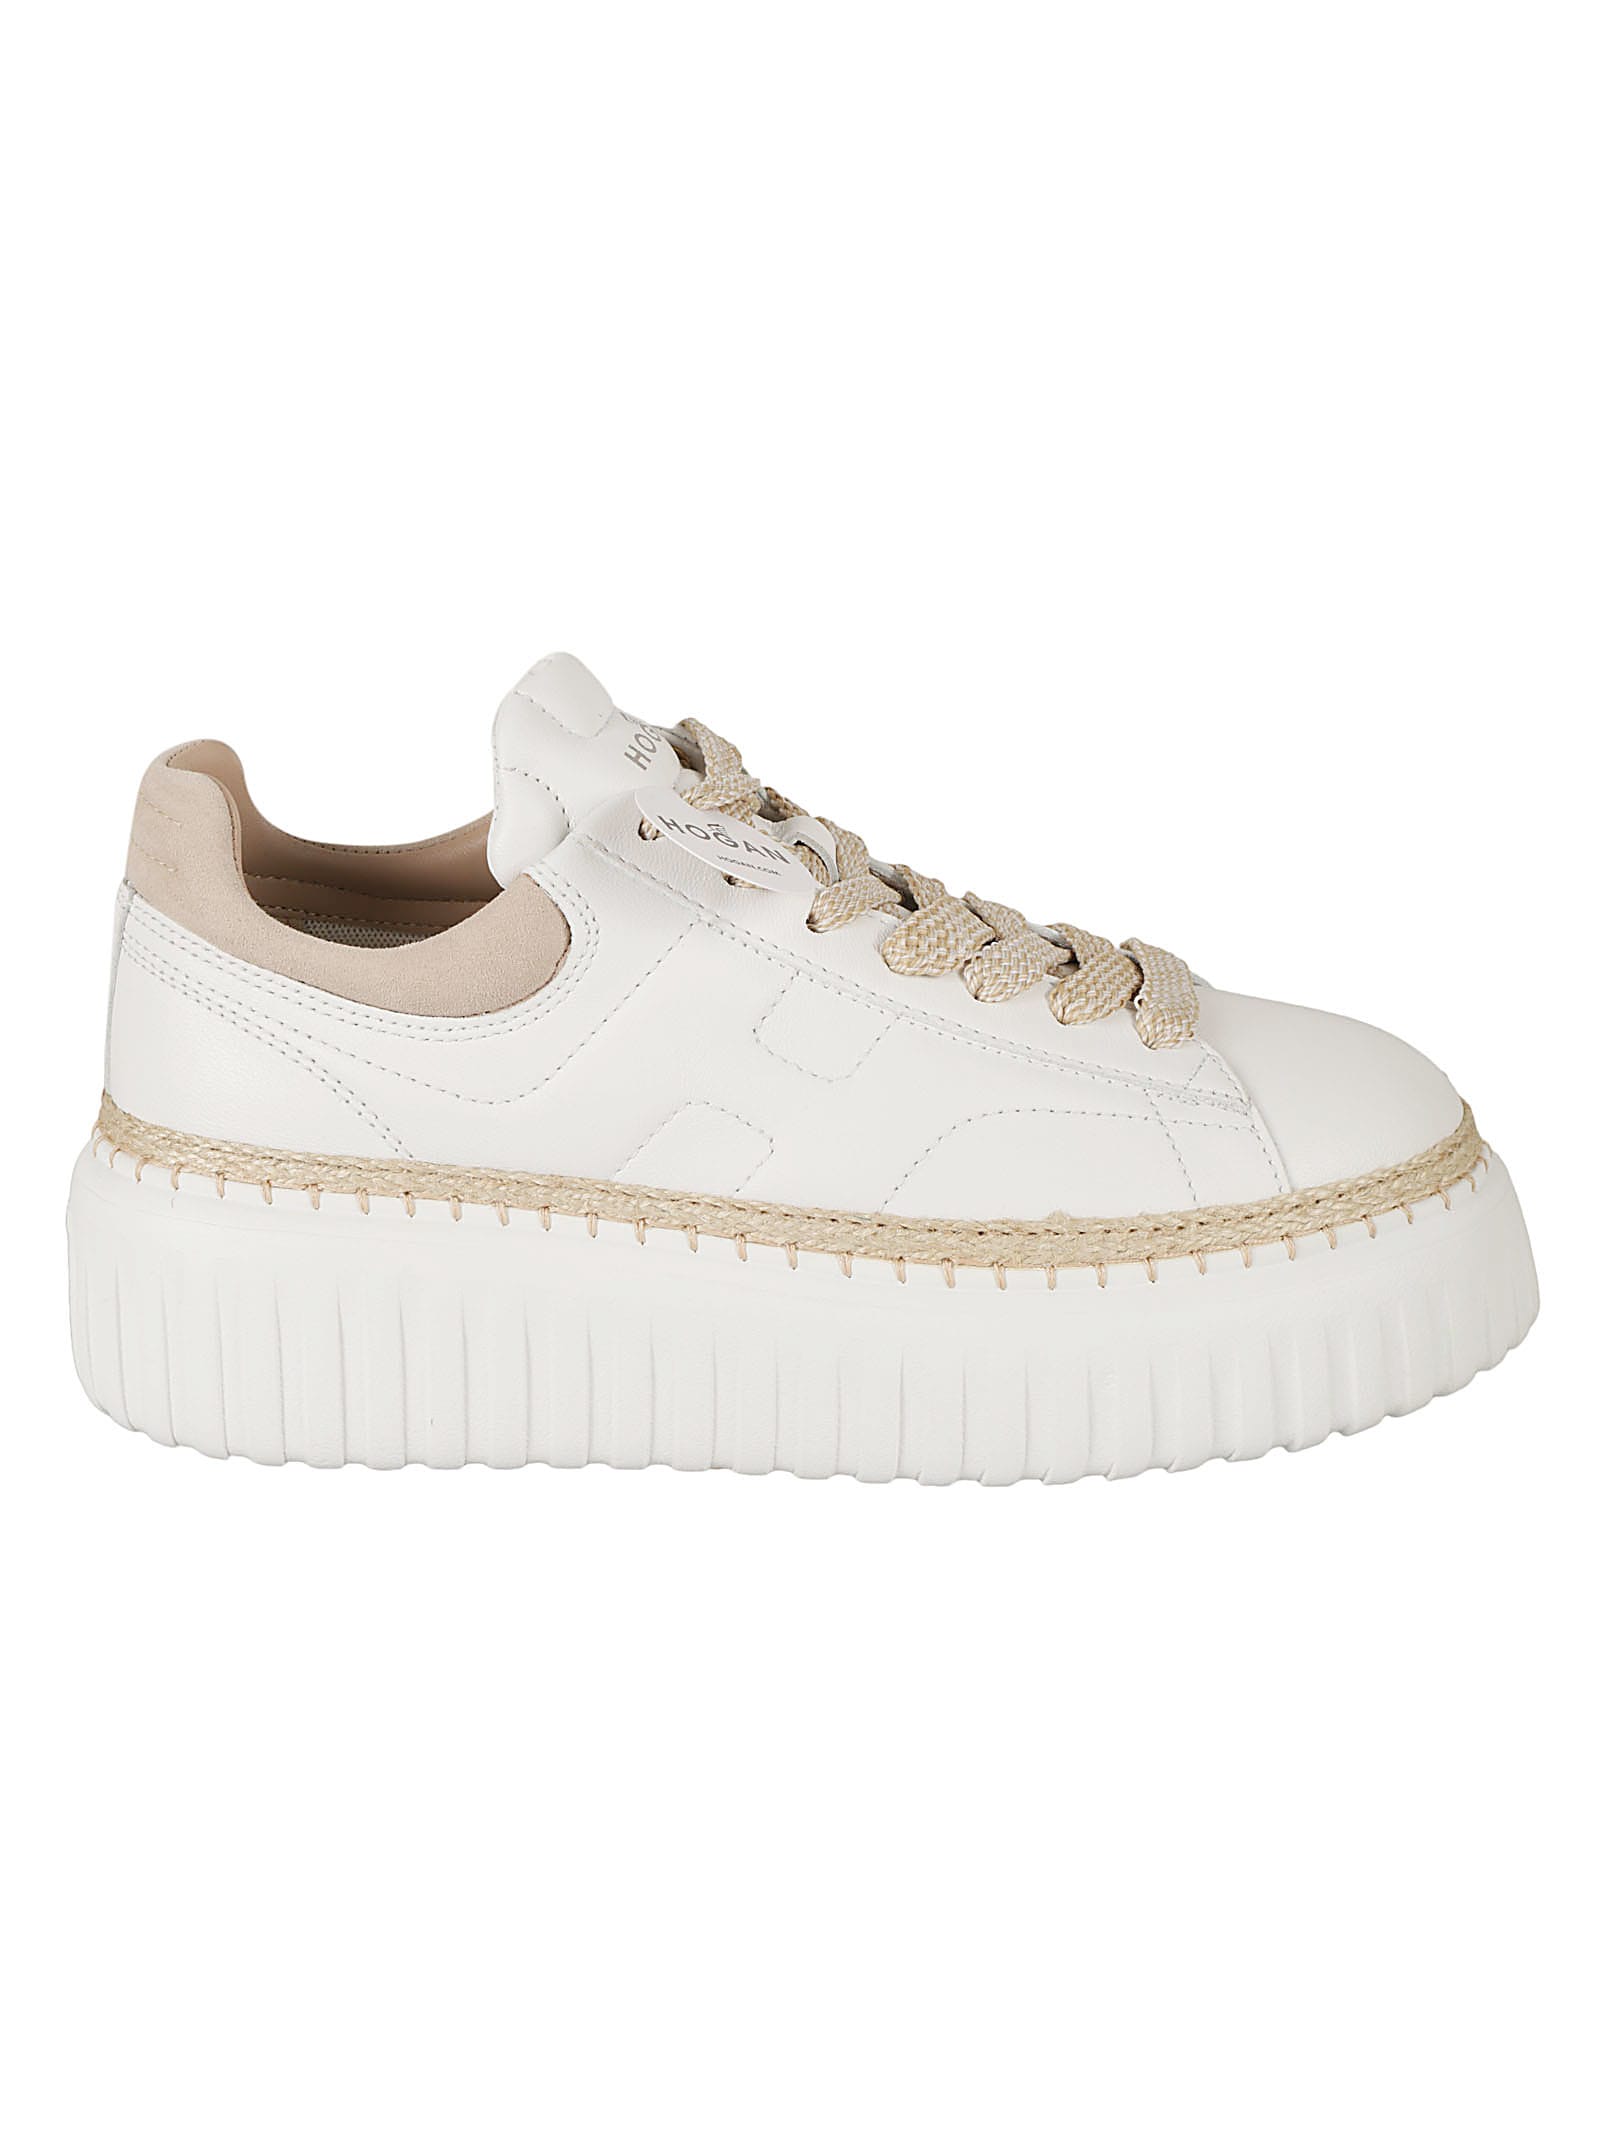 Hogan H569 H-stripes Sneakers In White